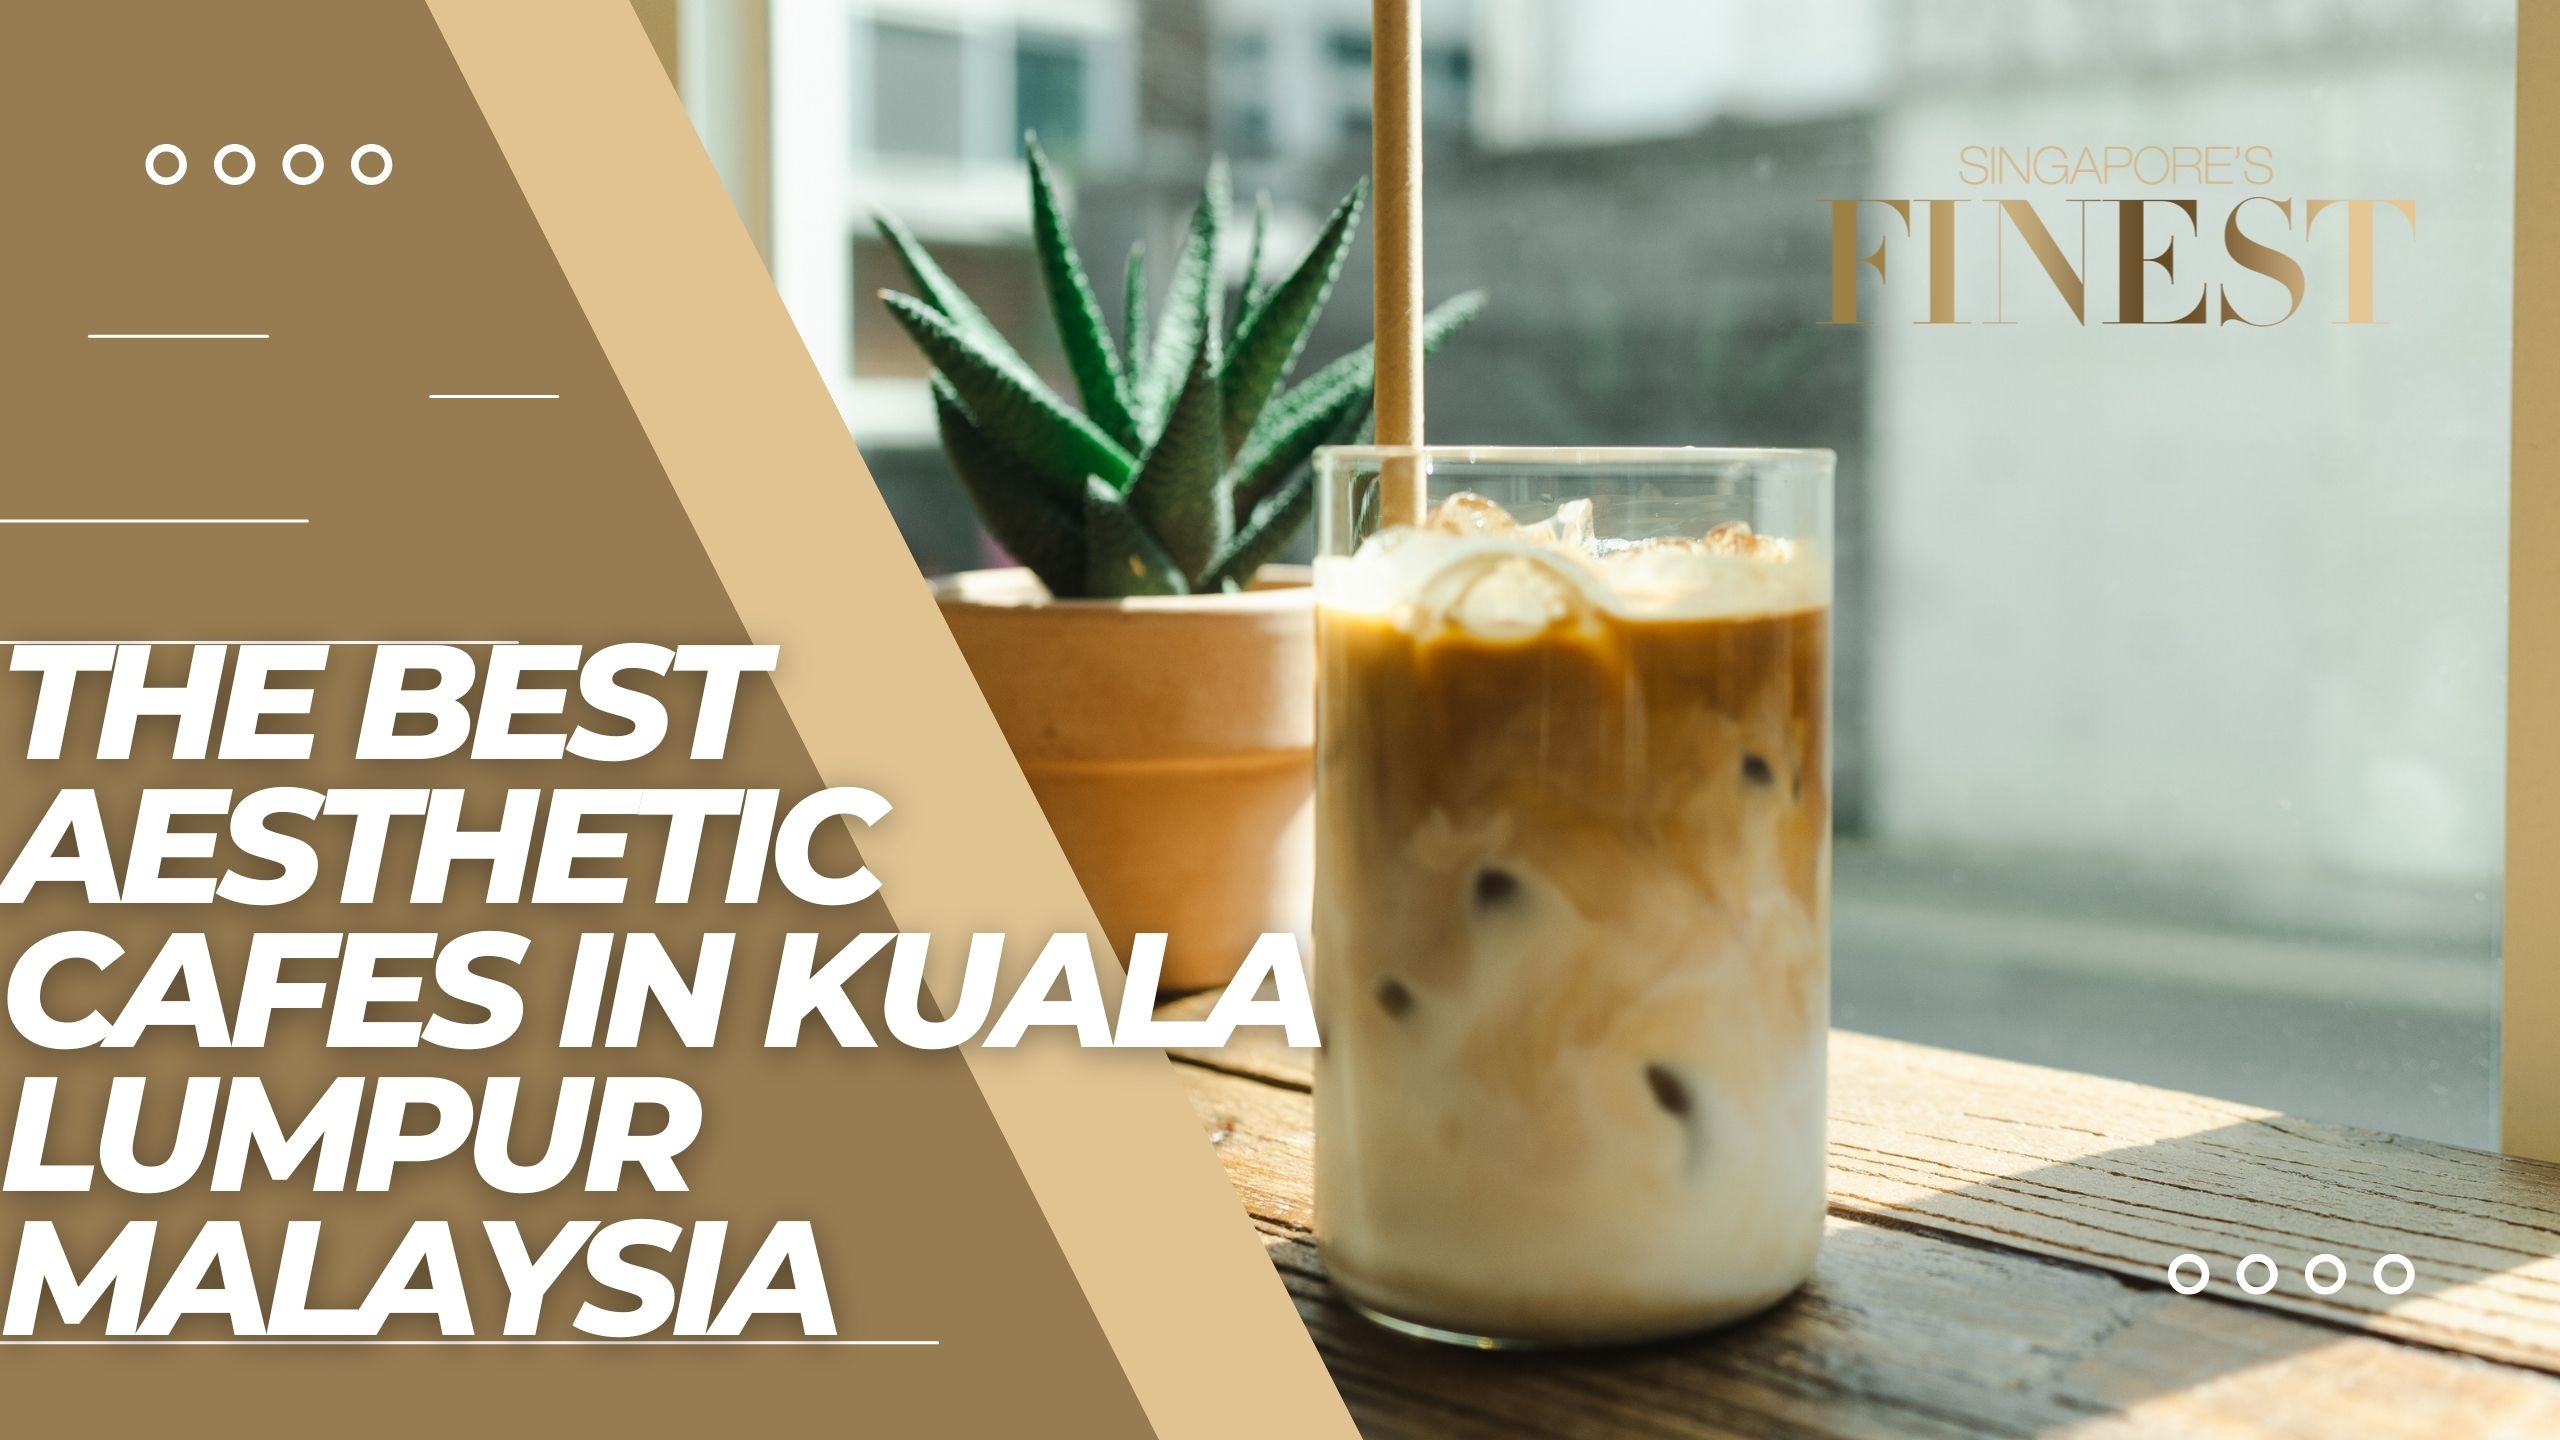 The Finest Aesthetic Cafes in Kuala Lumpur Malaysia